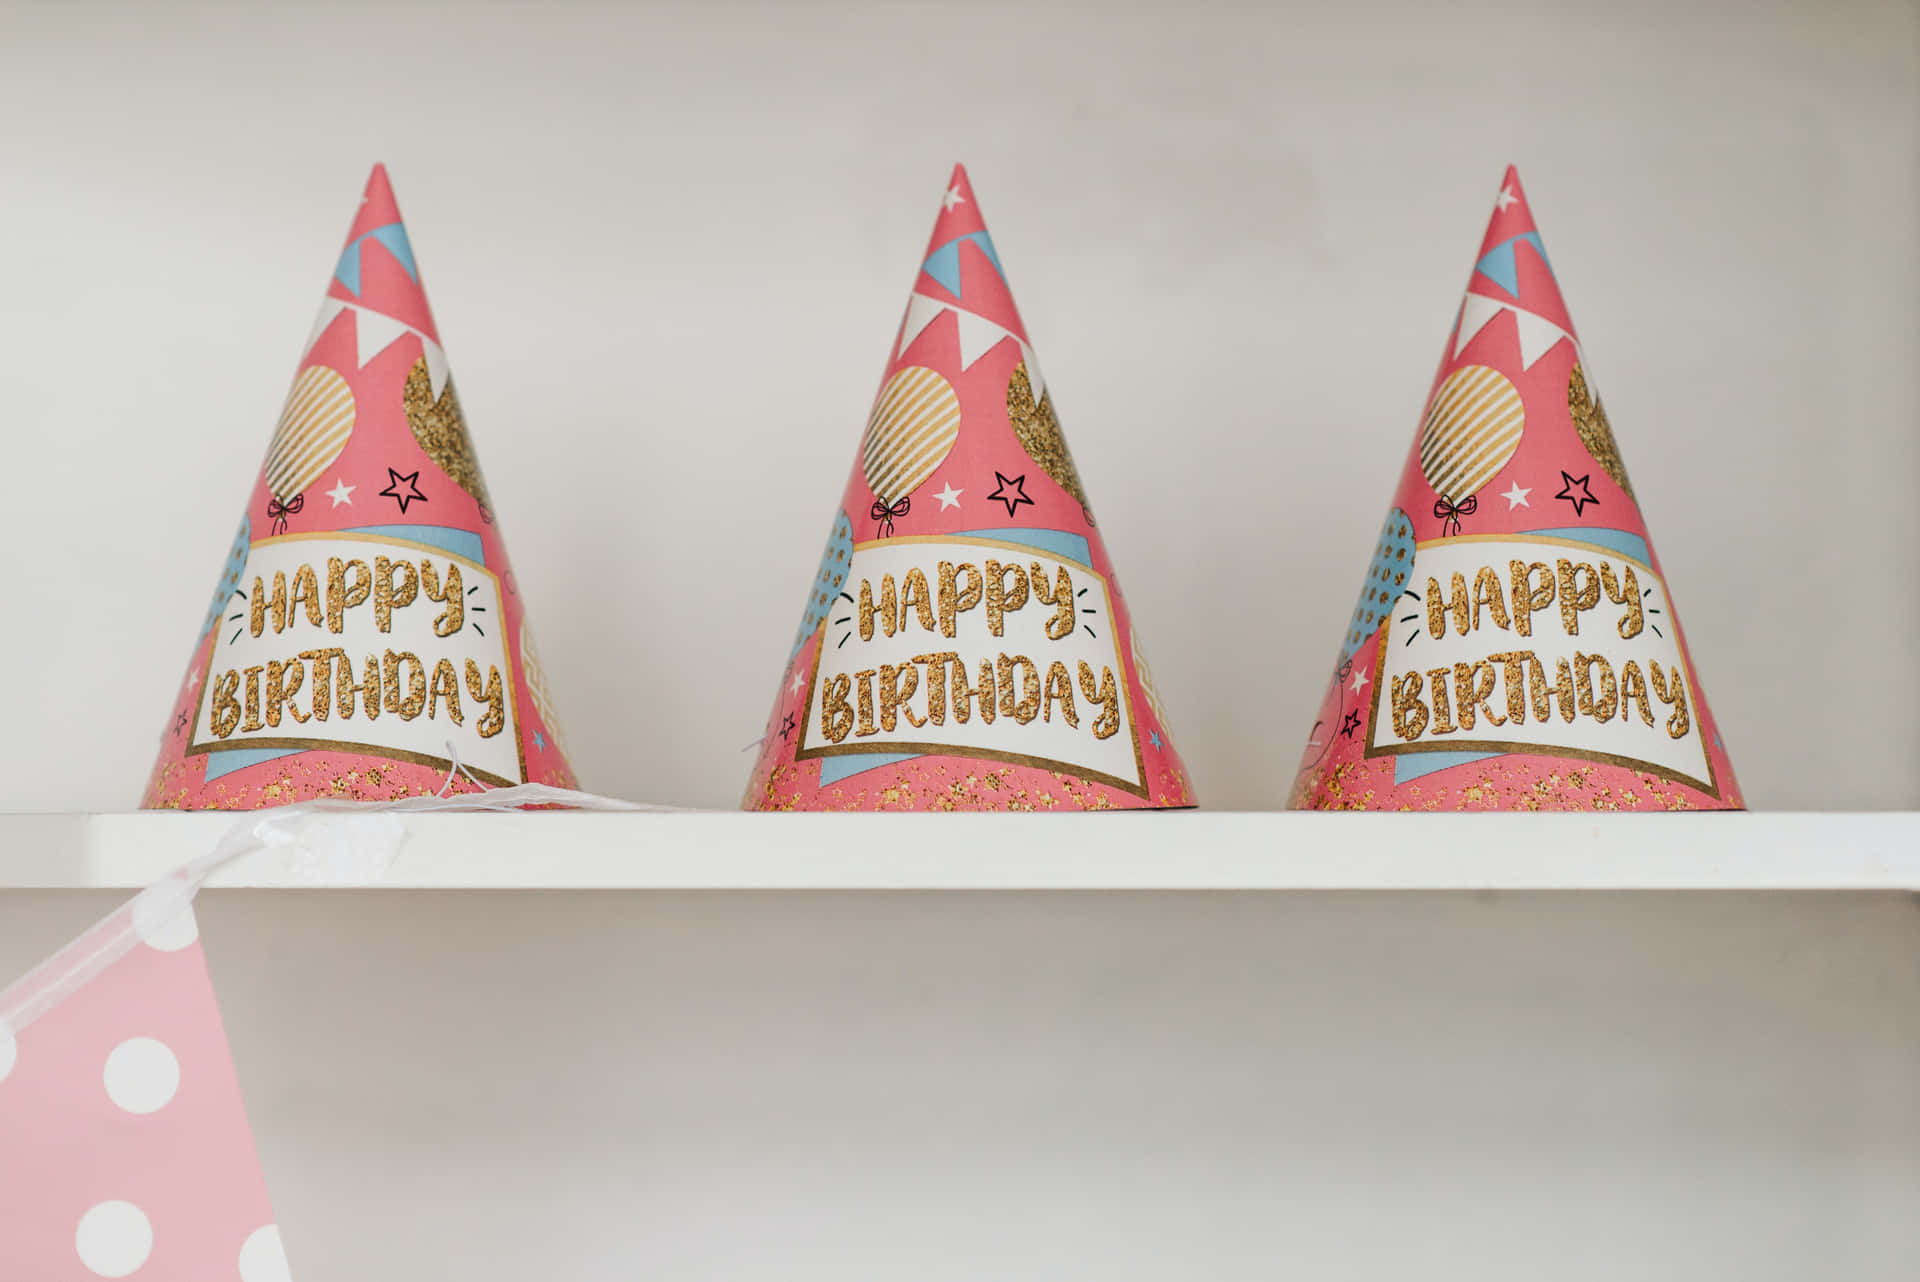 Three Pink And White Party Hats On A Shelf Background